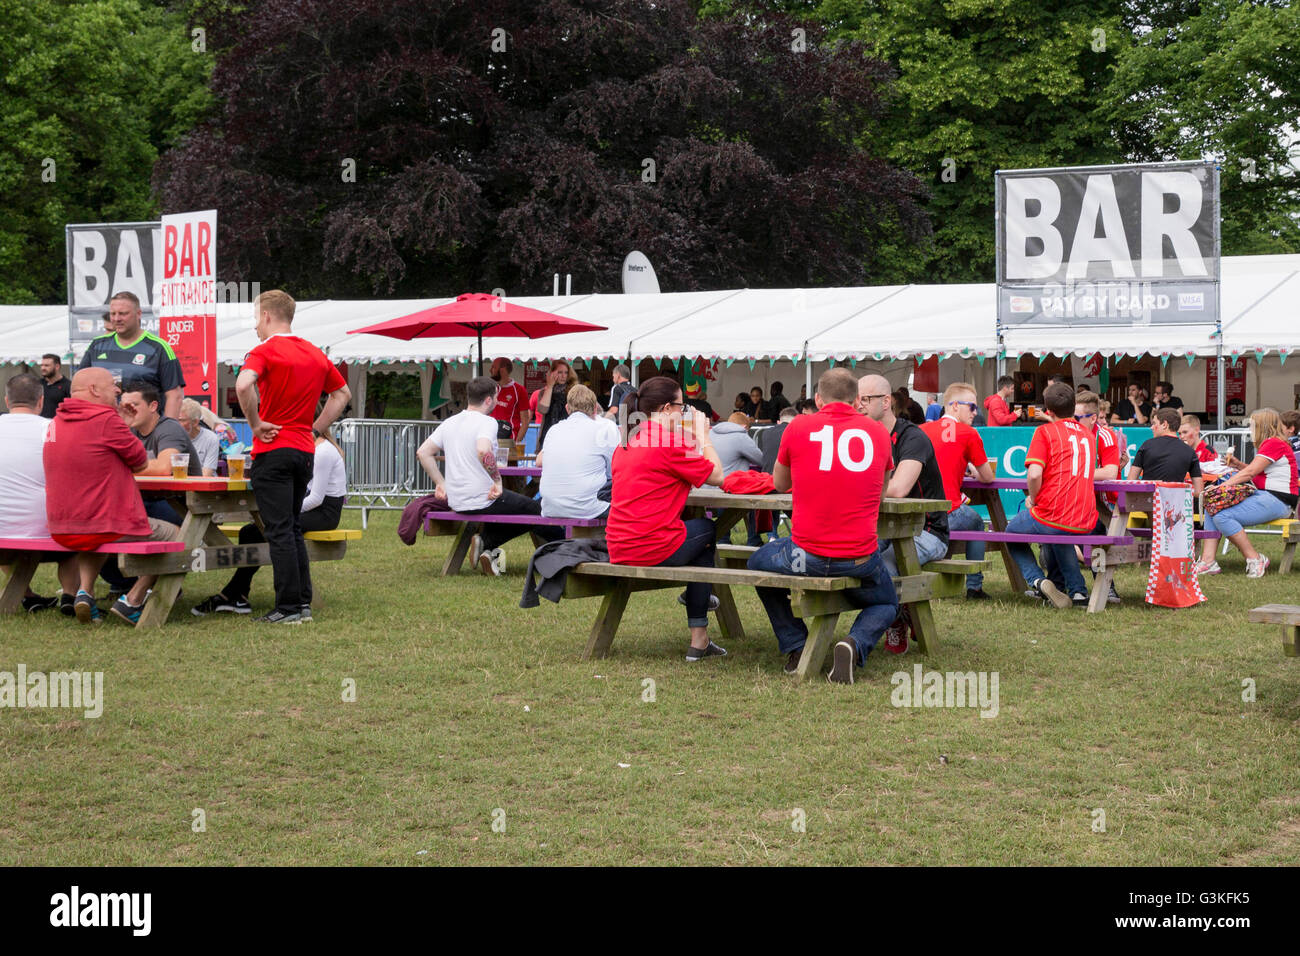 Wales fans at the fan zone in Cardiff ahead of the Euro 2016 match between Wales and Slovakia. Stock Photo